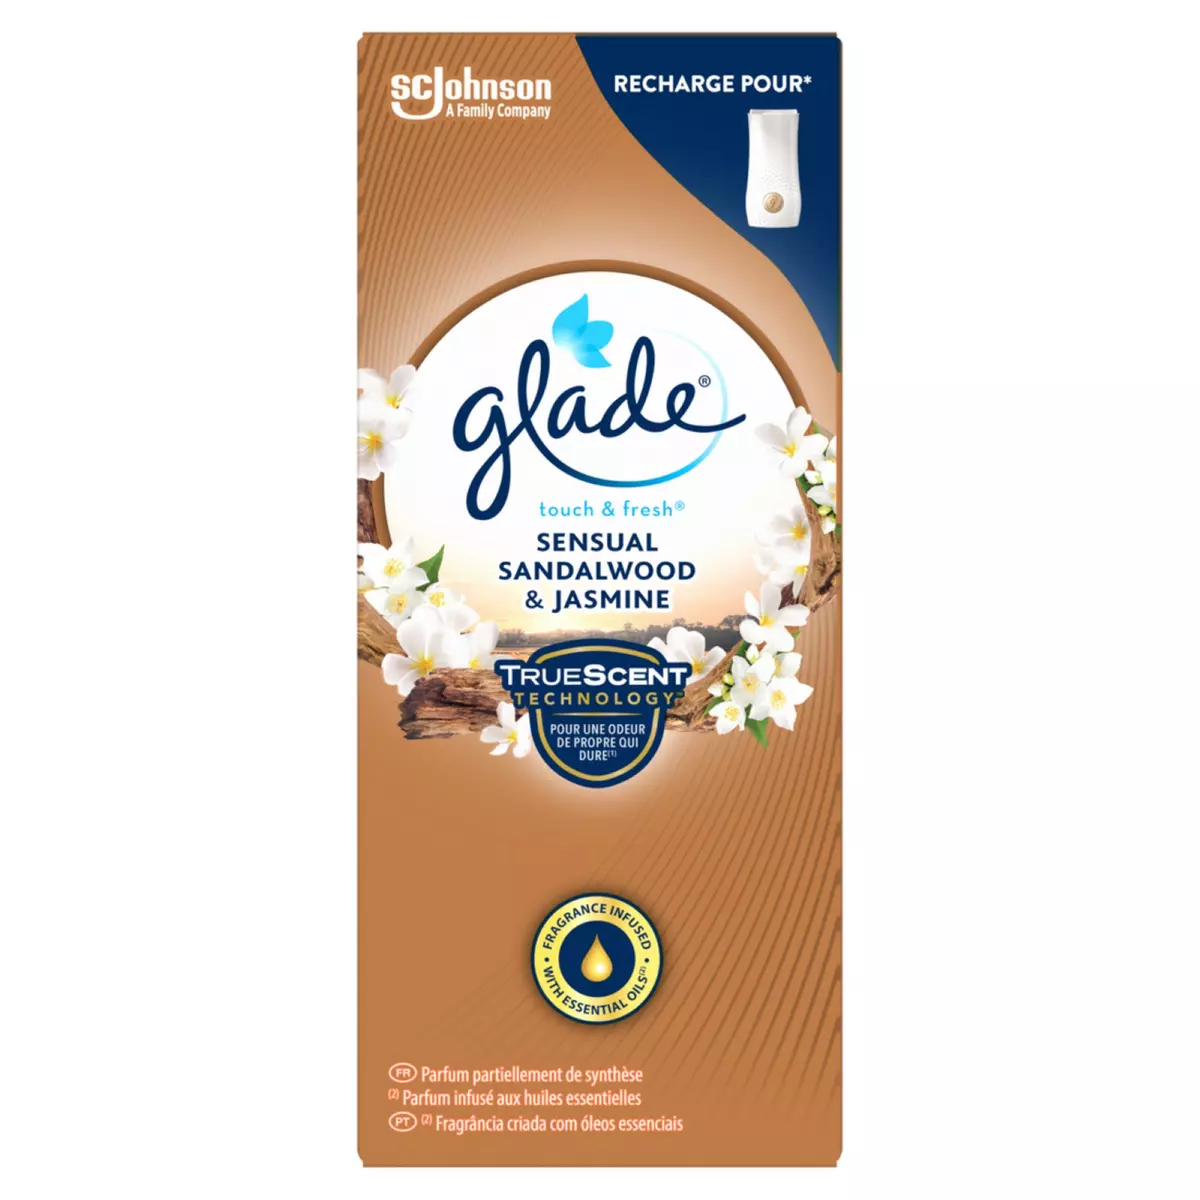 GLADE Touch & Fresh recharge pour diffuseur santal jasmin 10ml